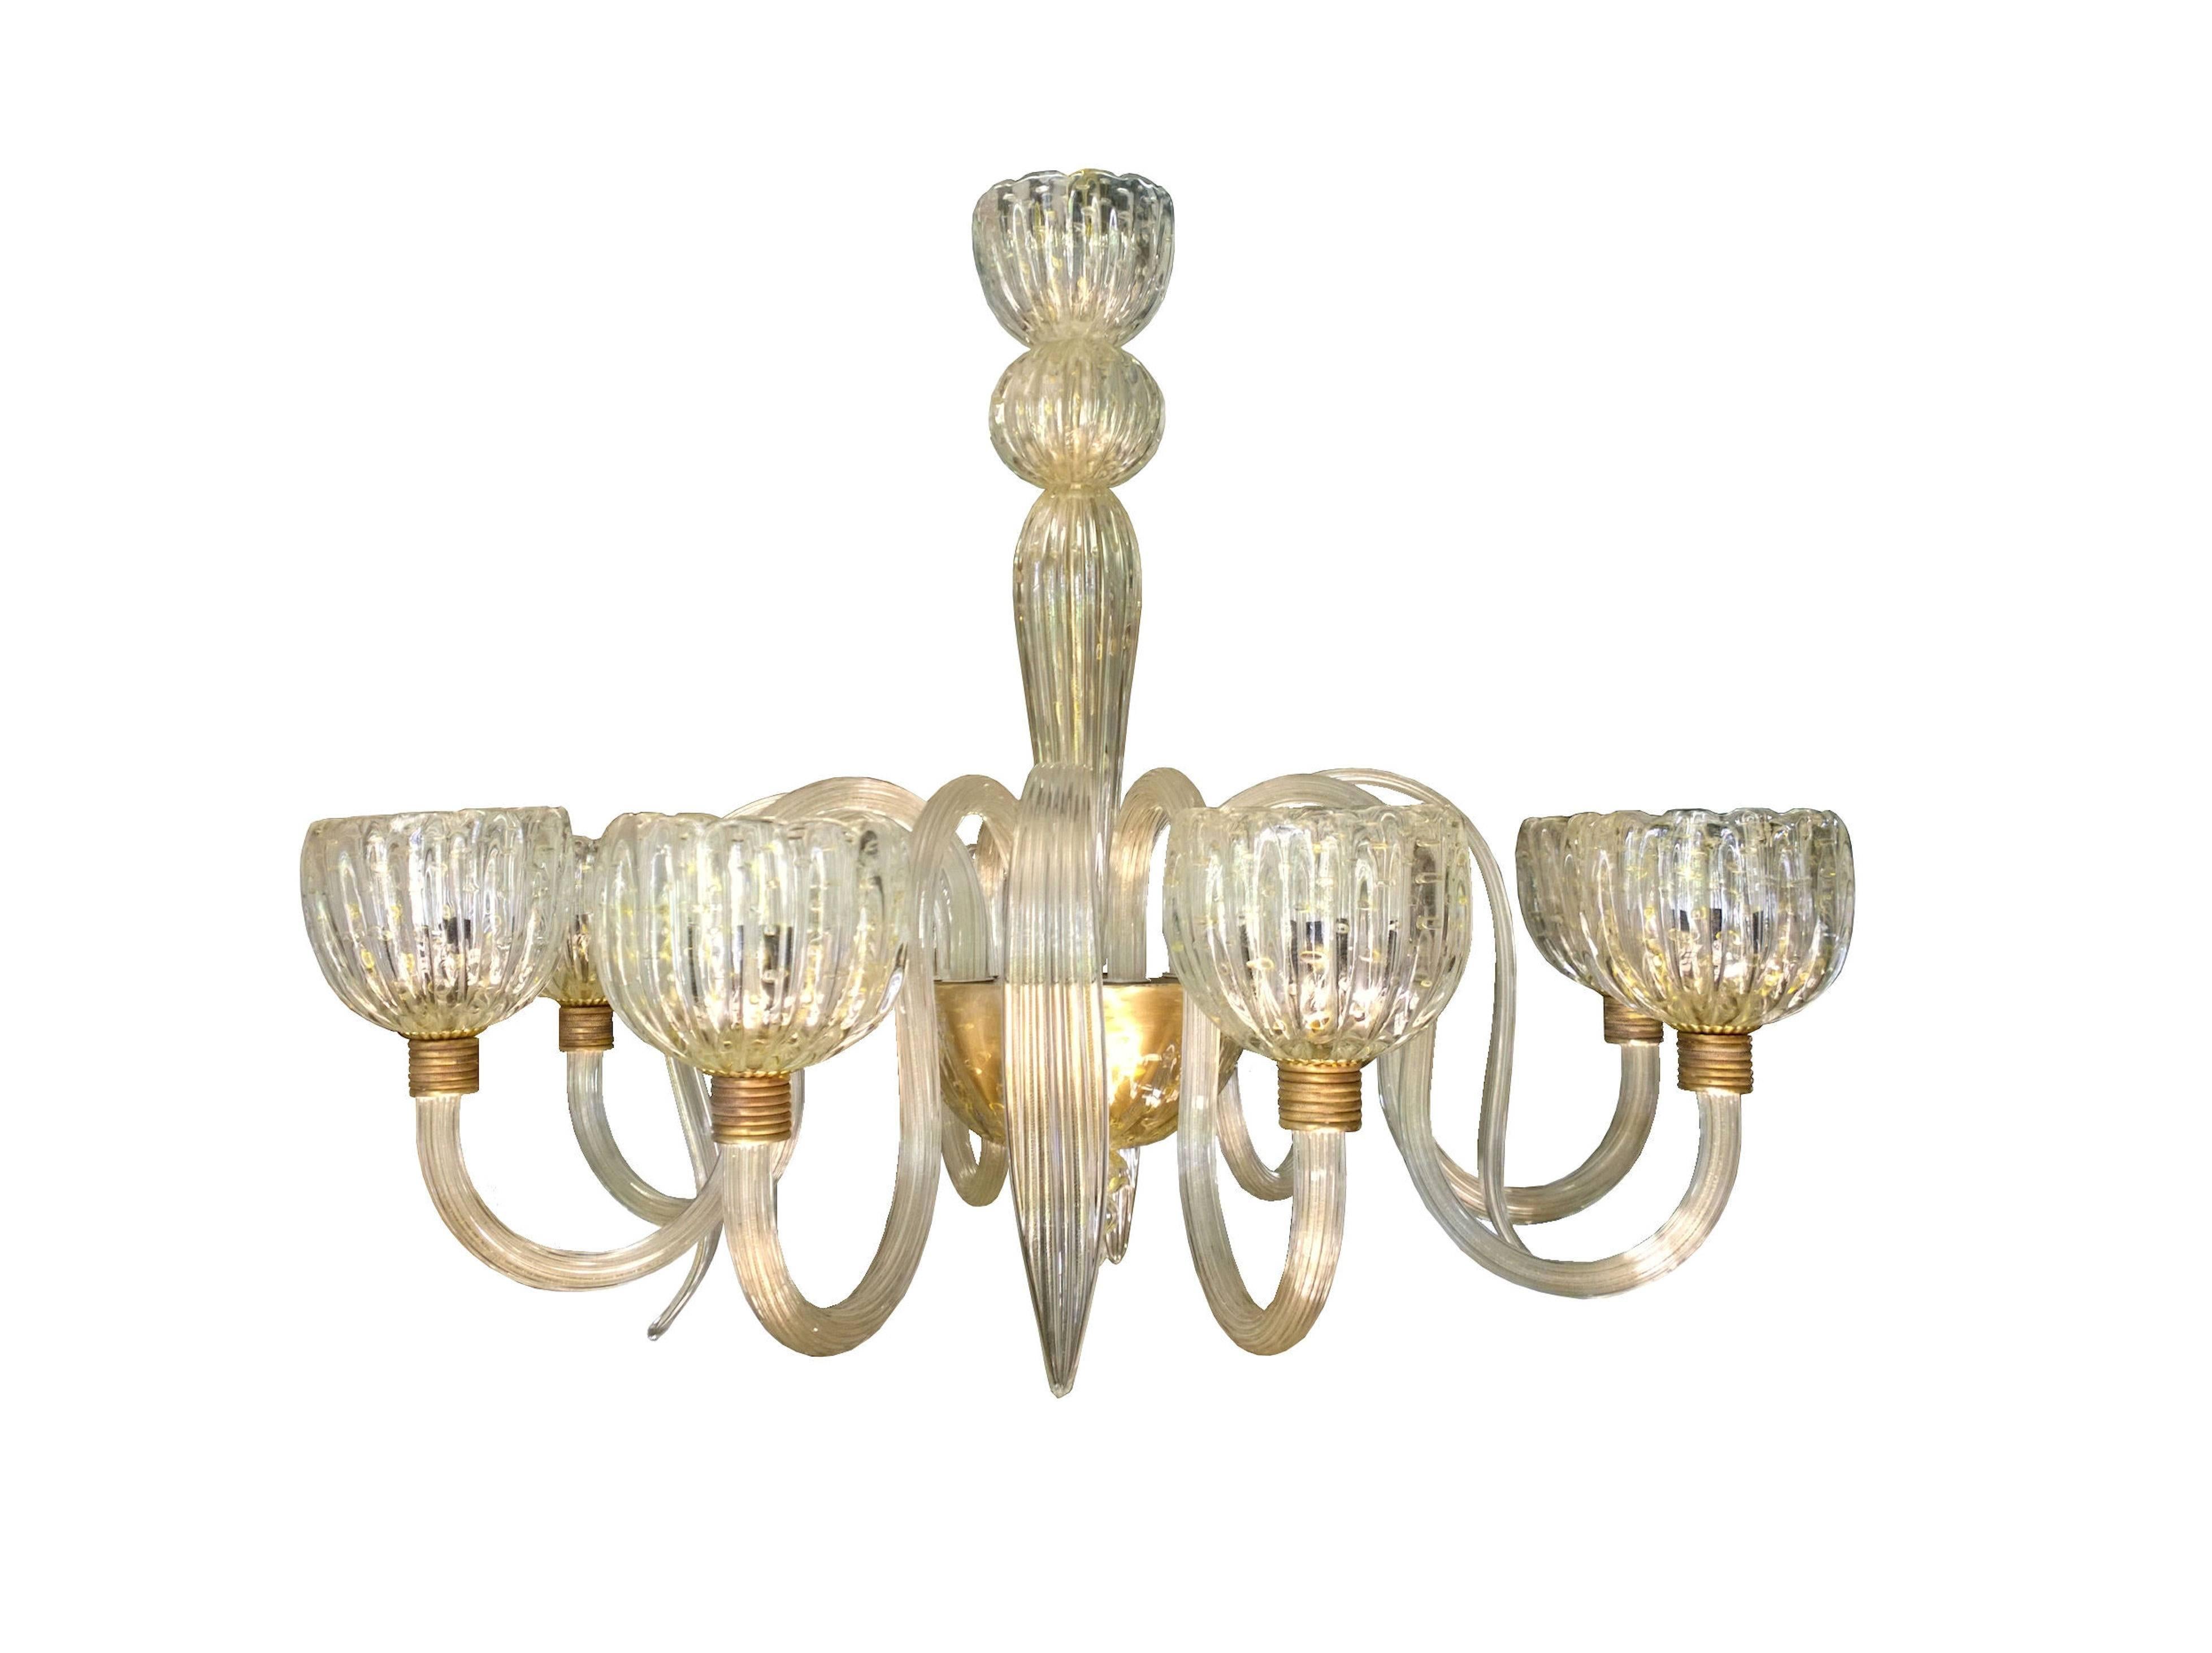 Large eight-arm glass chandelier in lightly gold flecked Murano glass with interspersed glass leaf ornaments. Candle cups and other elements are crafted of gold flecked bubble glass. Gilt fittings give the fixture's glass a soft golden glow.